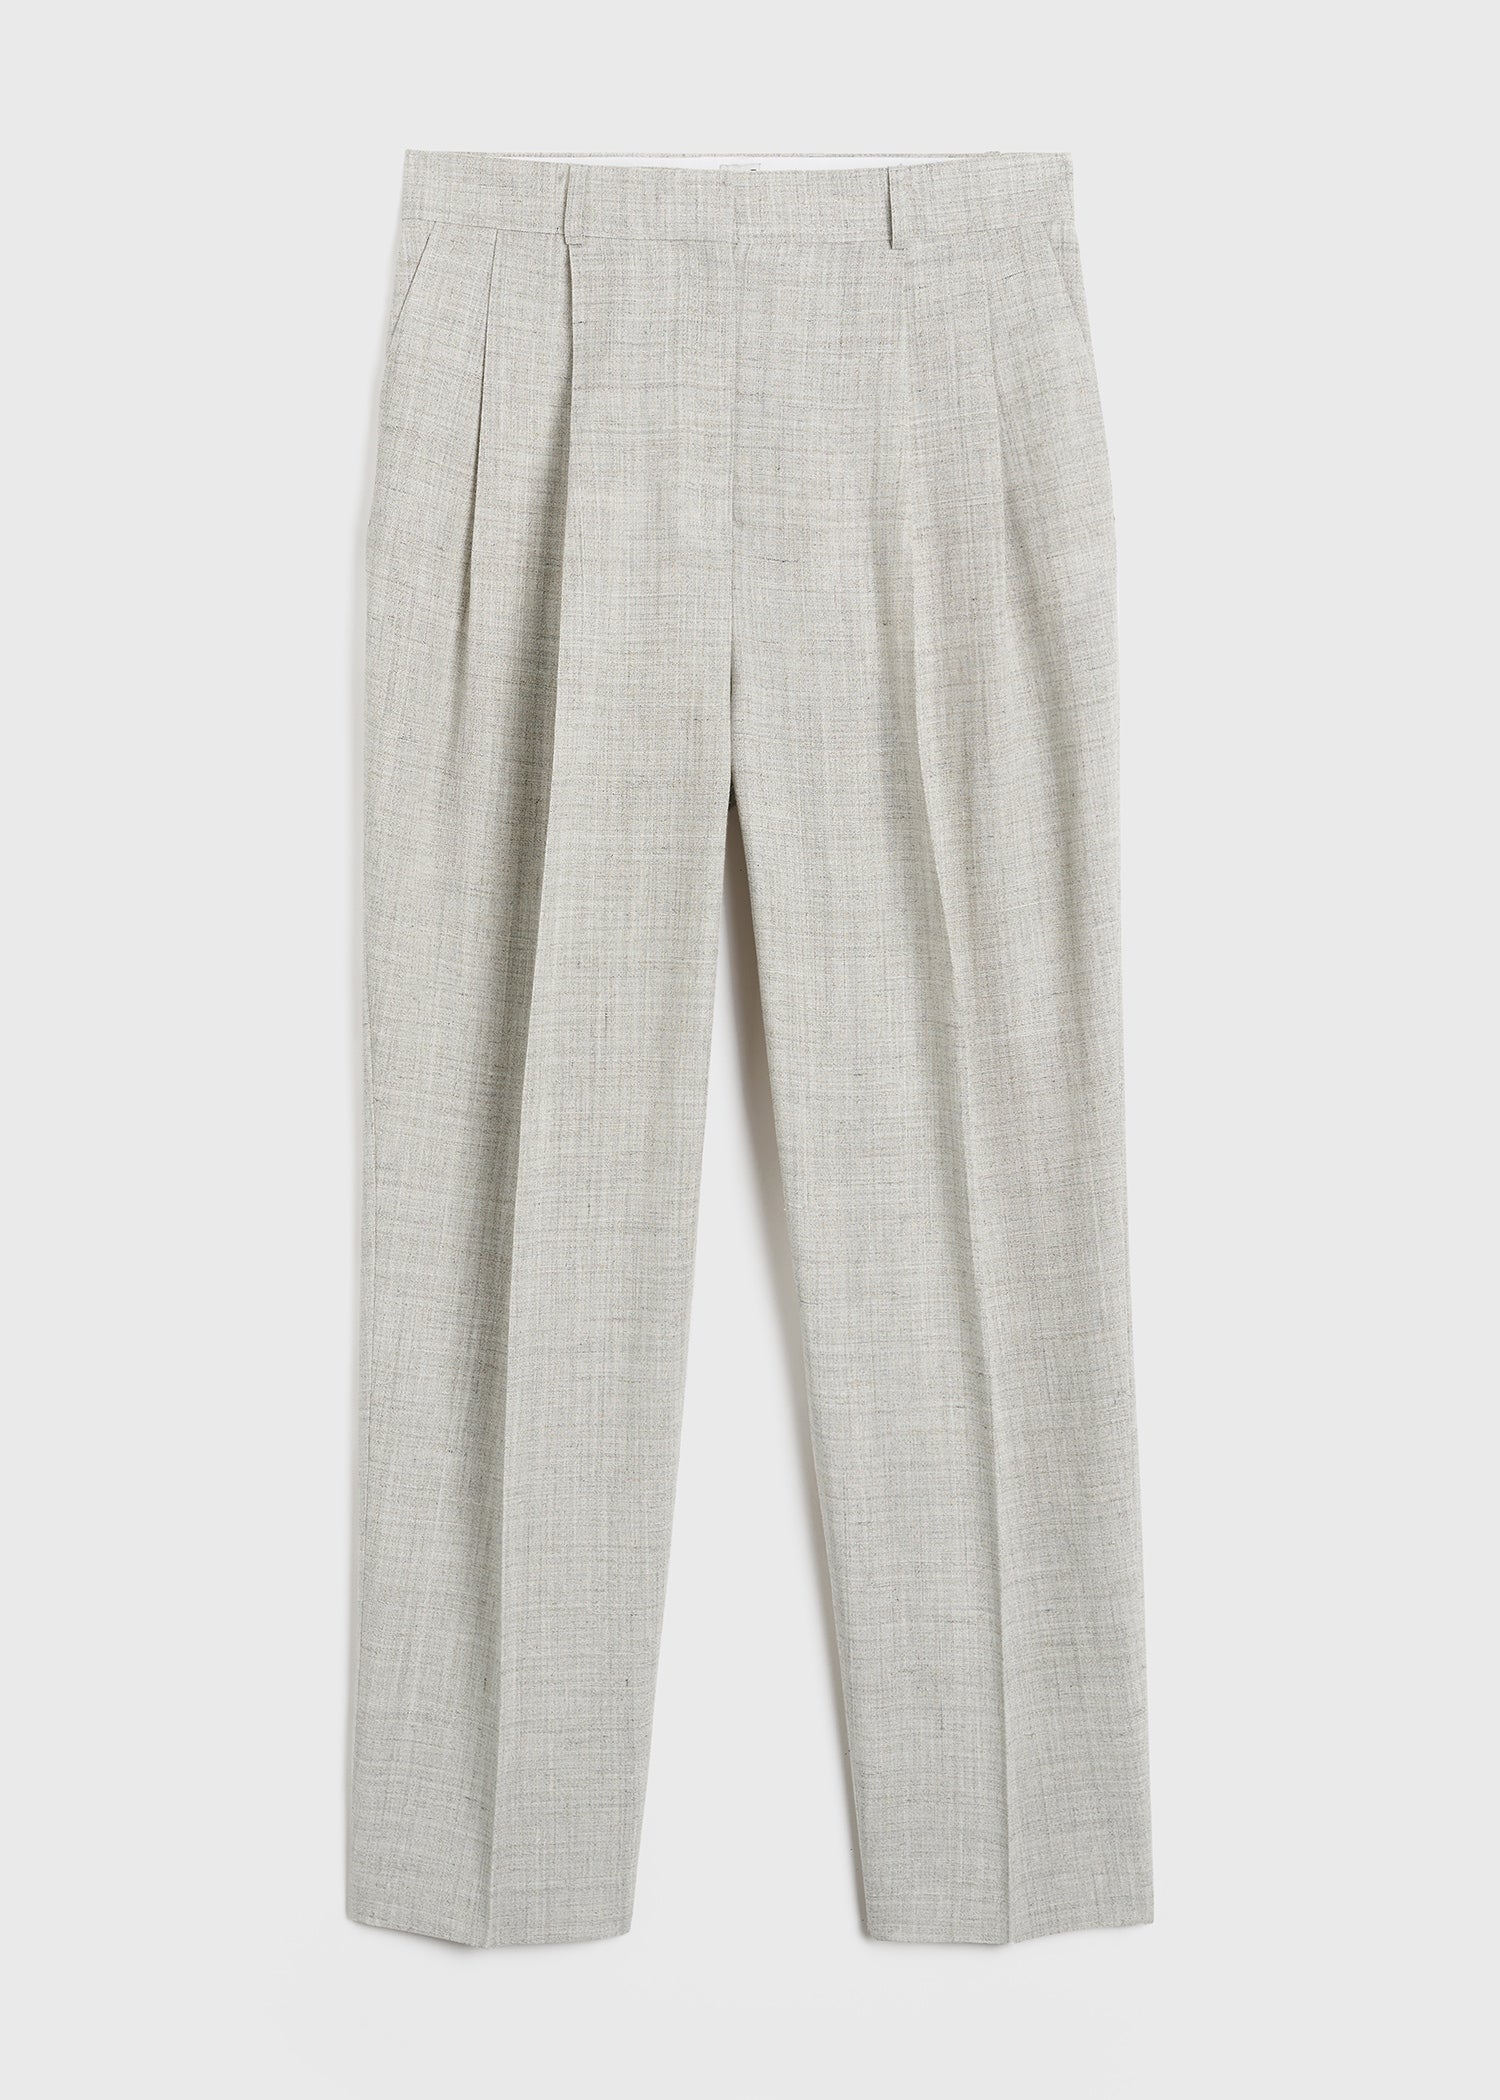 TOTEME mélange-effect tailored trousers - Grey